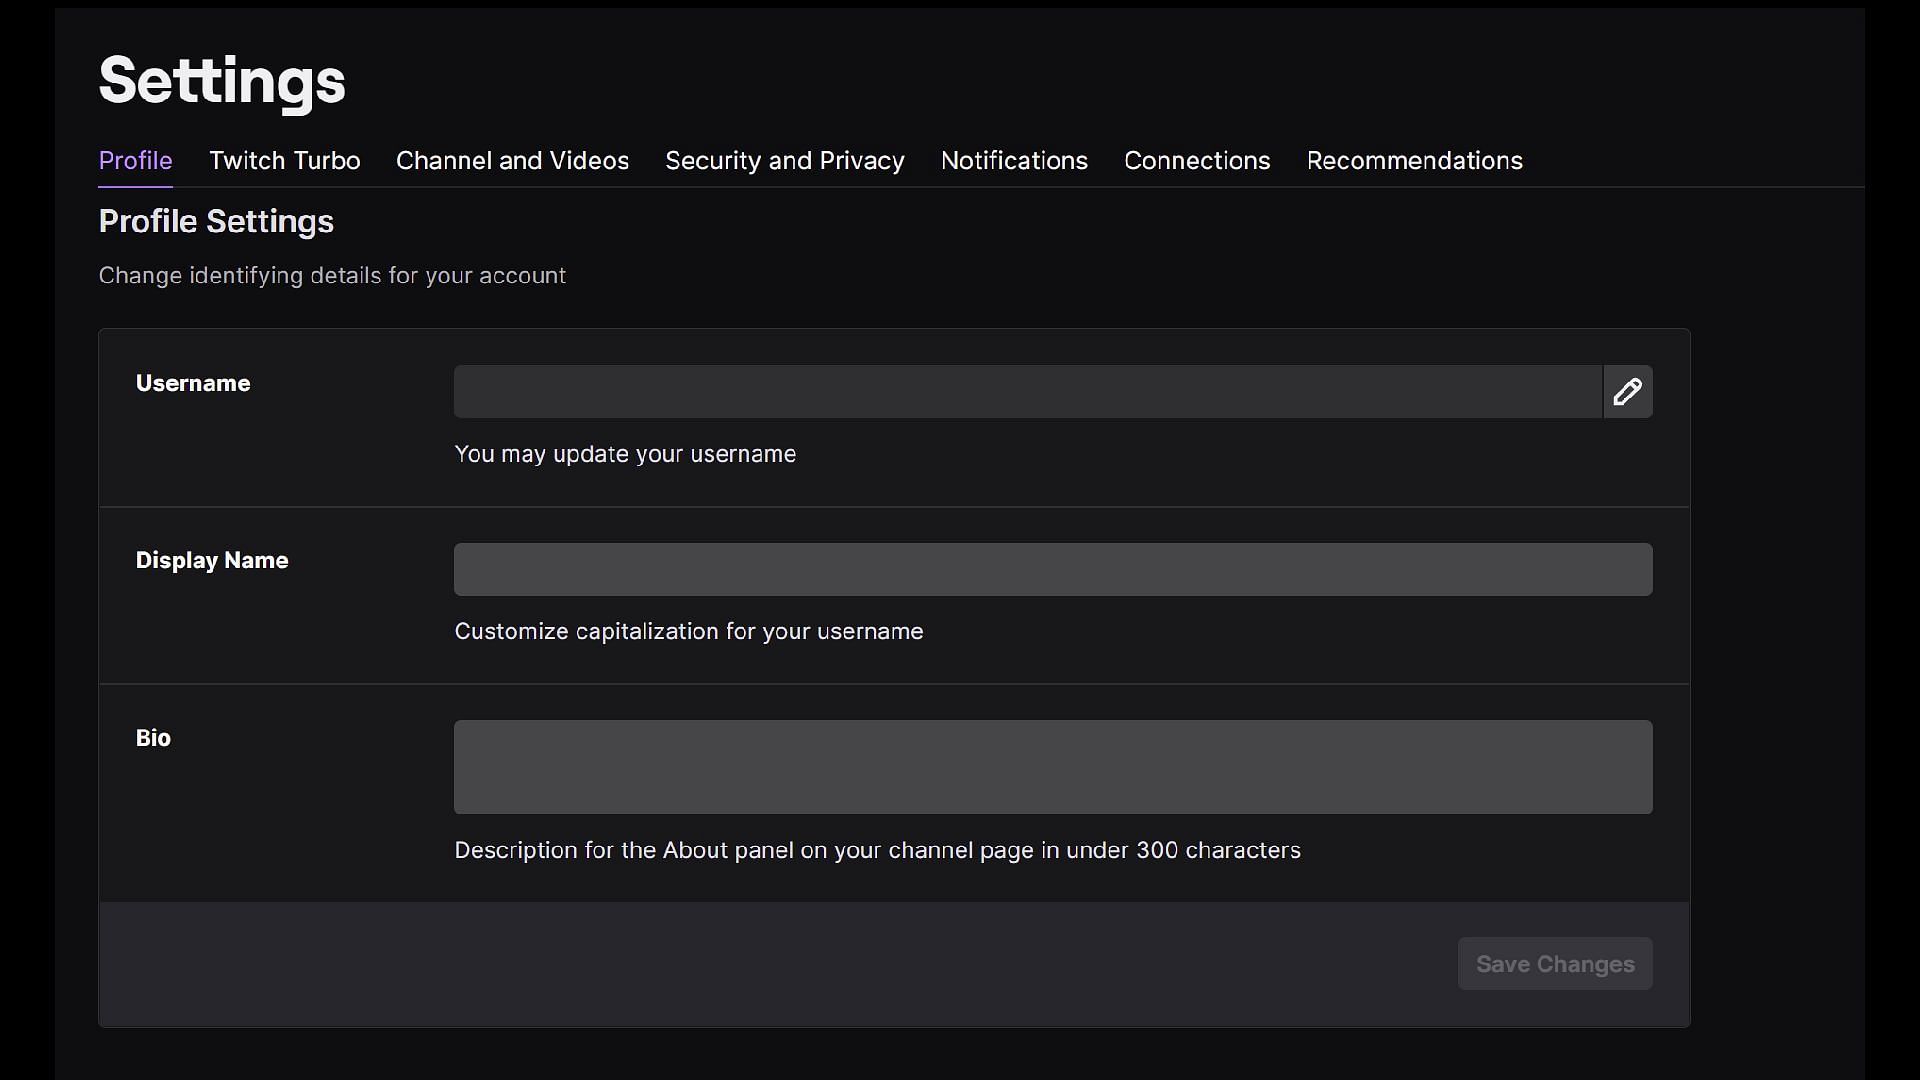 Settings under which the user can change their username (Image via Twitch)